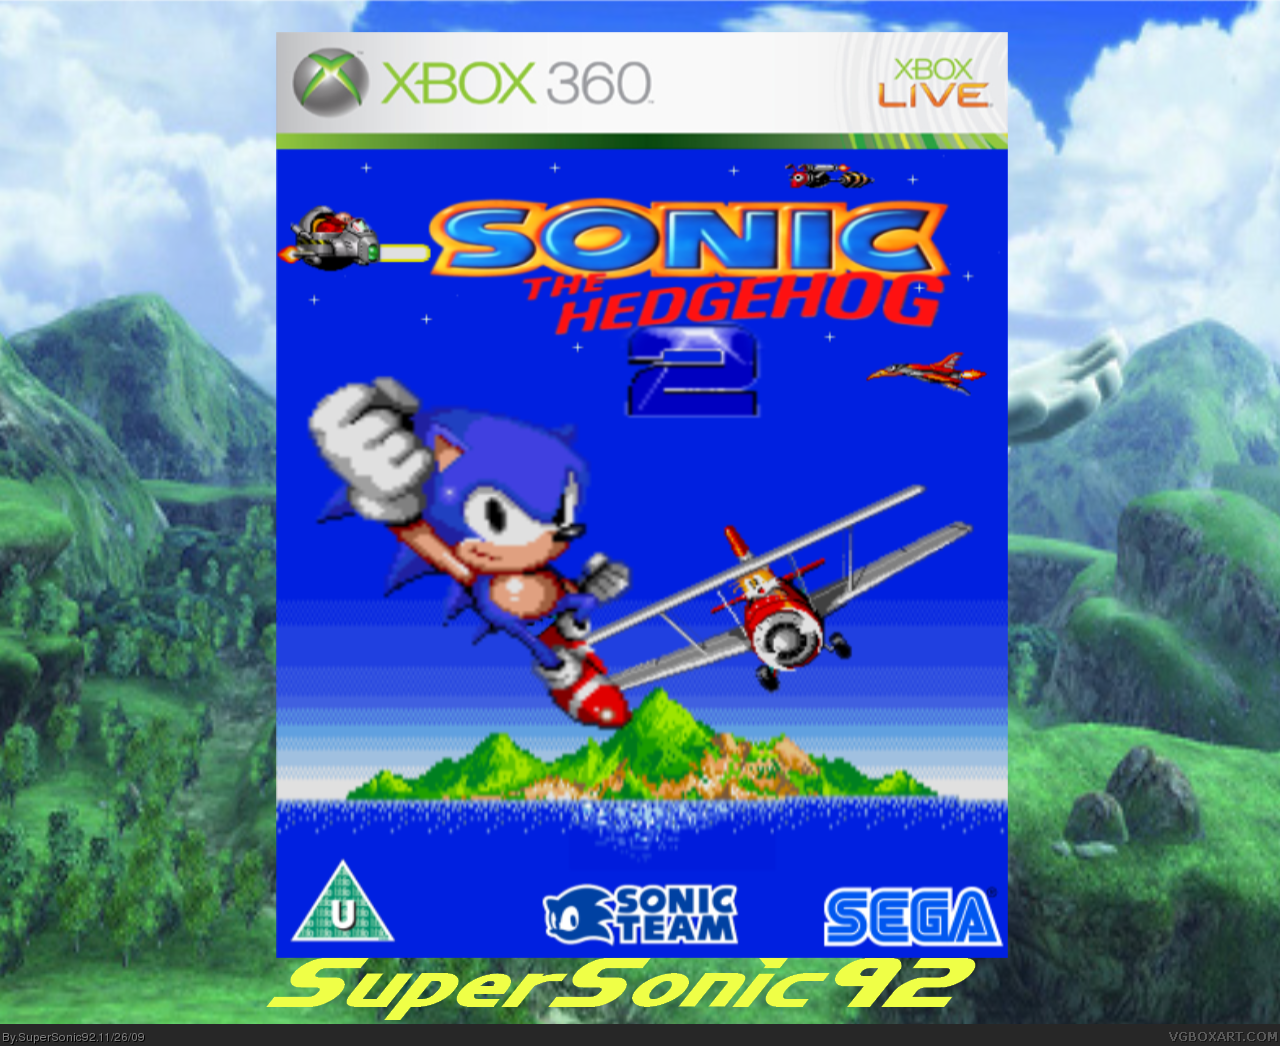 sonic-the-hedgehog-2-xbox-360-box-art-cover-by-supersonic92